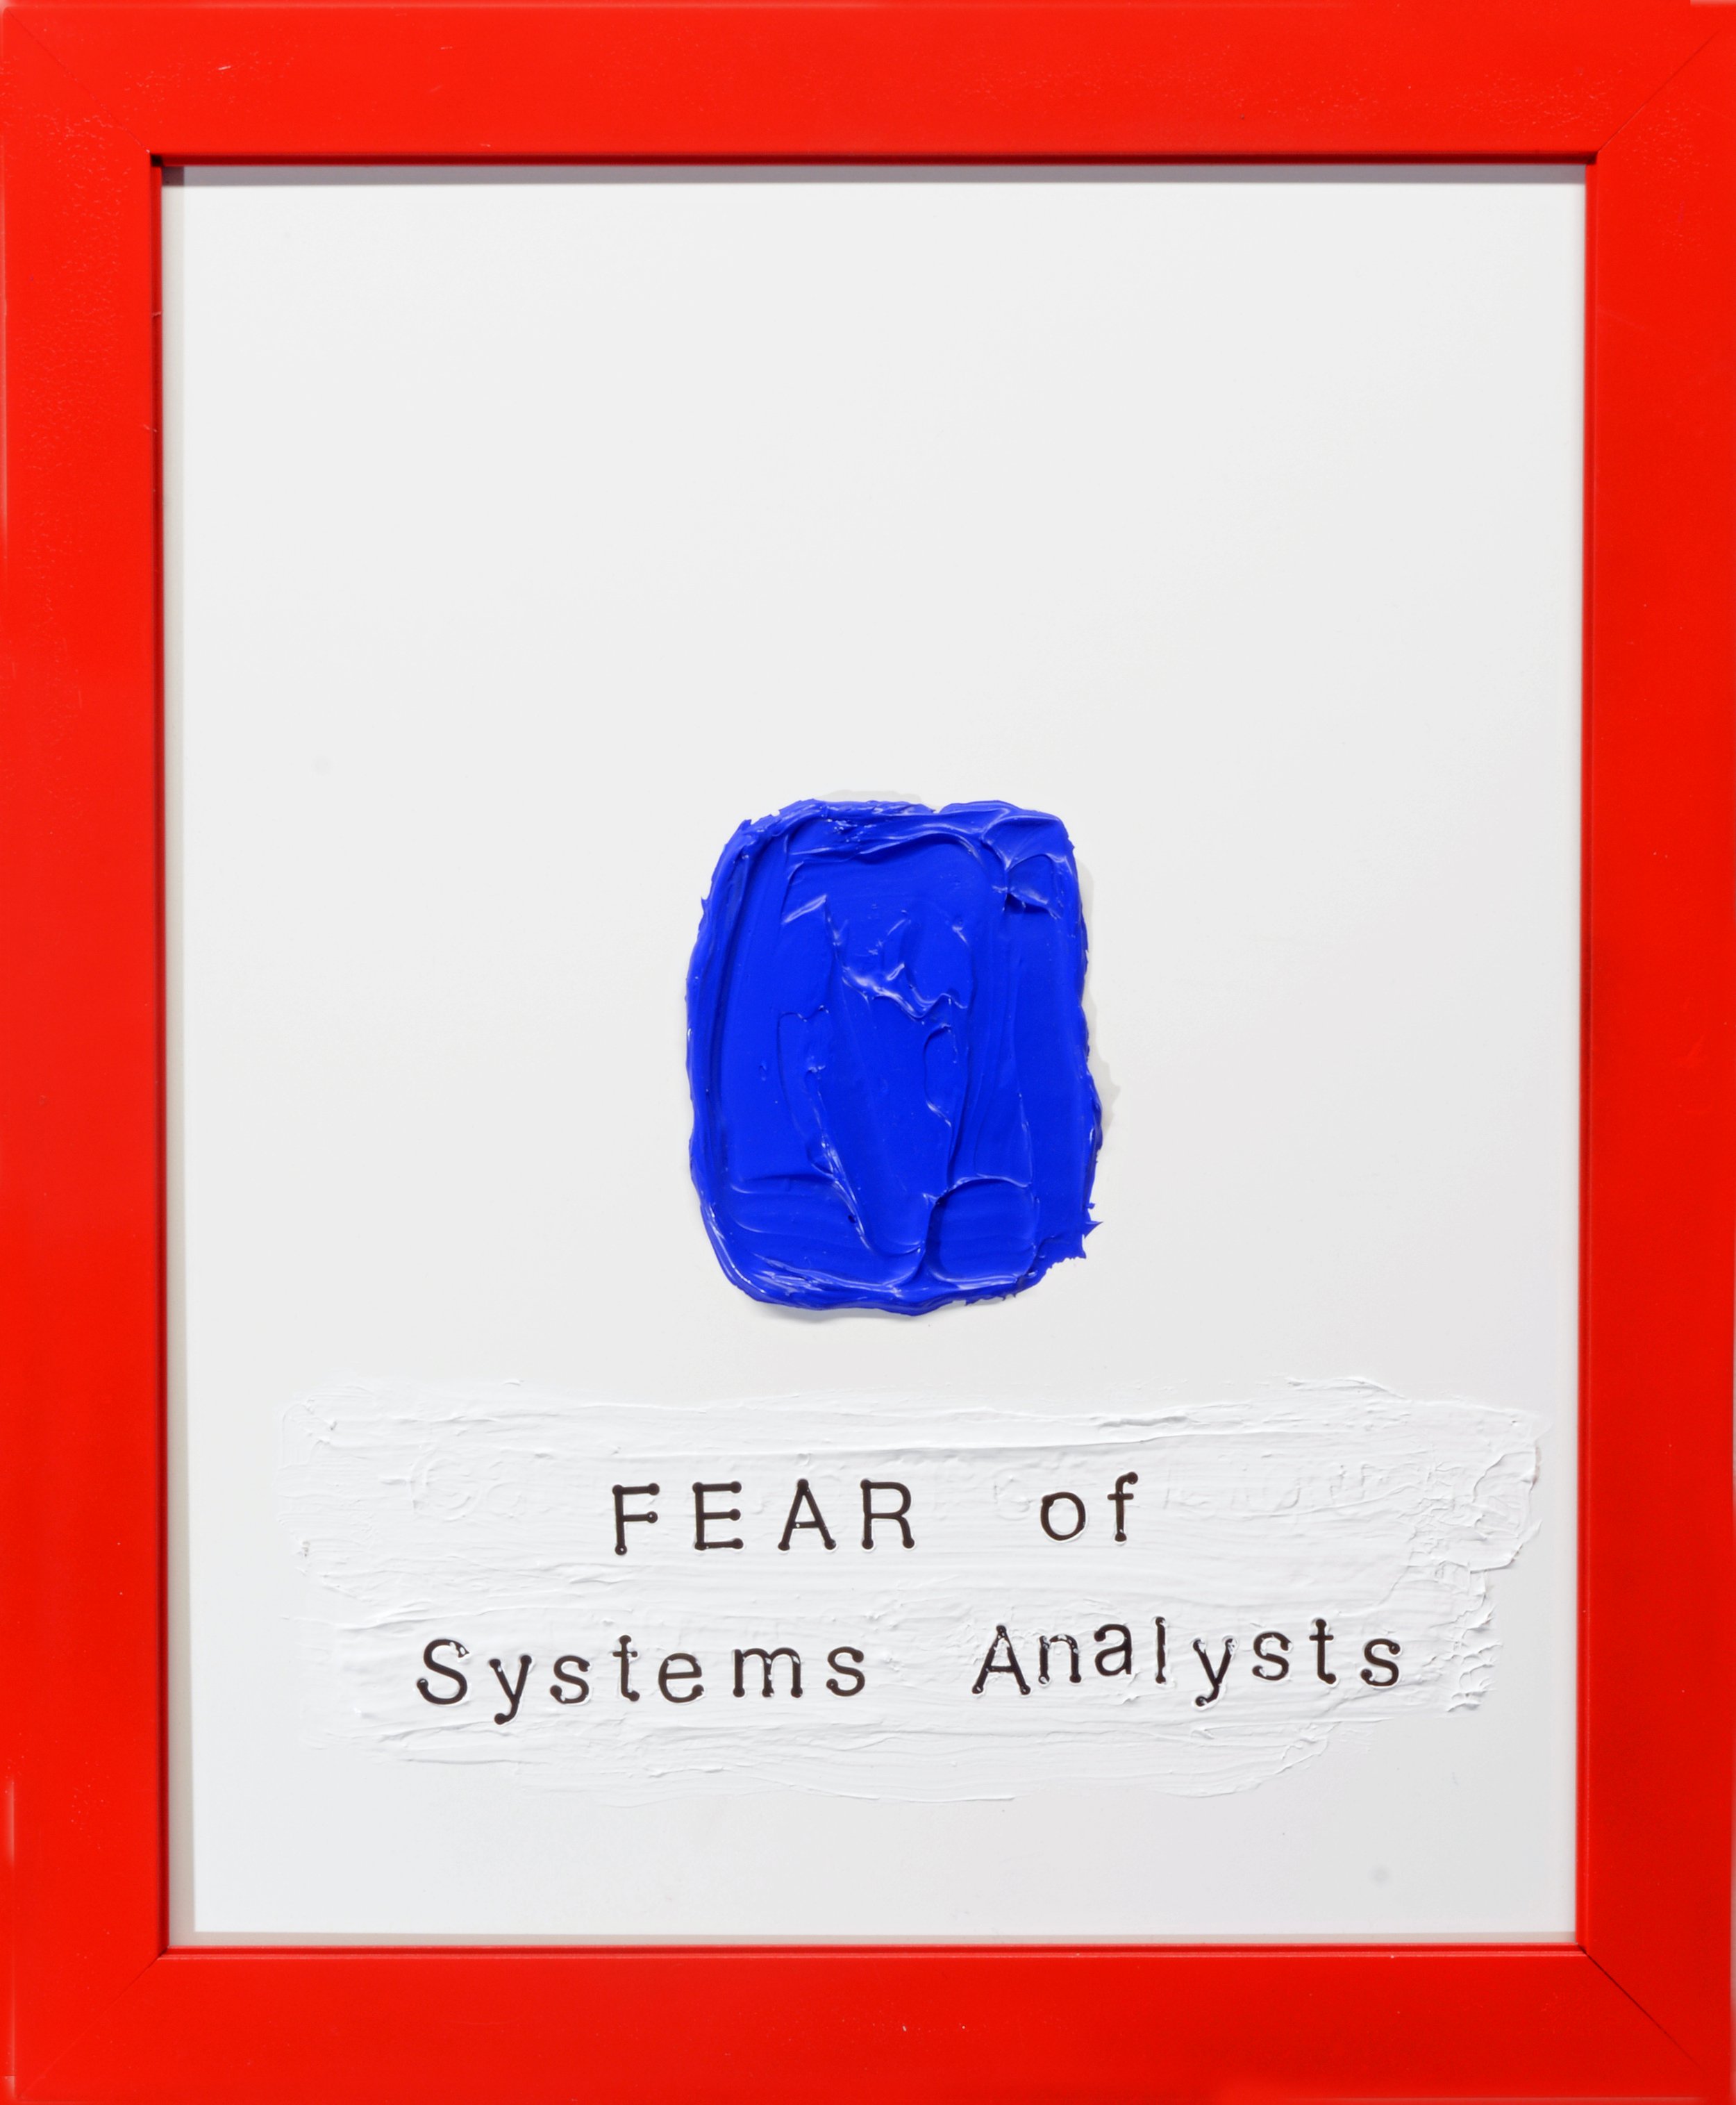 Fear of Systems Analysts